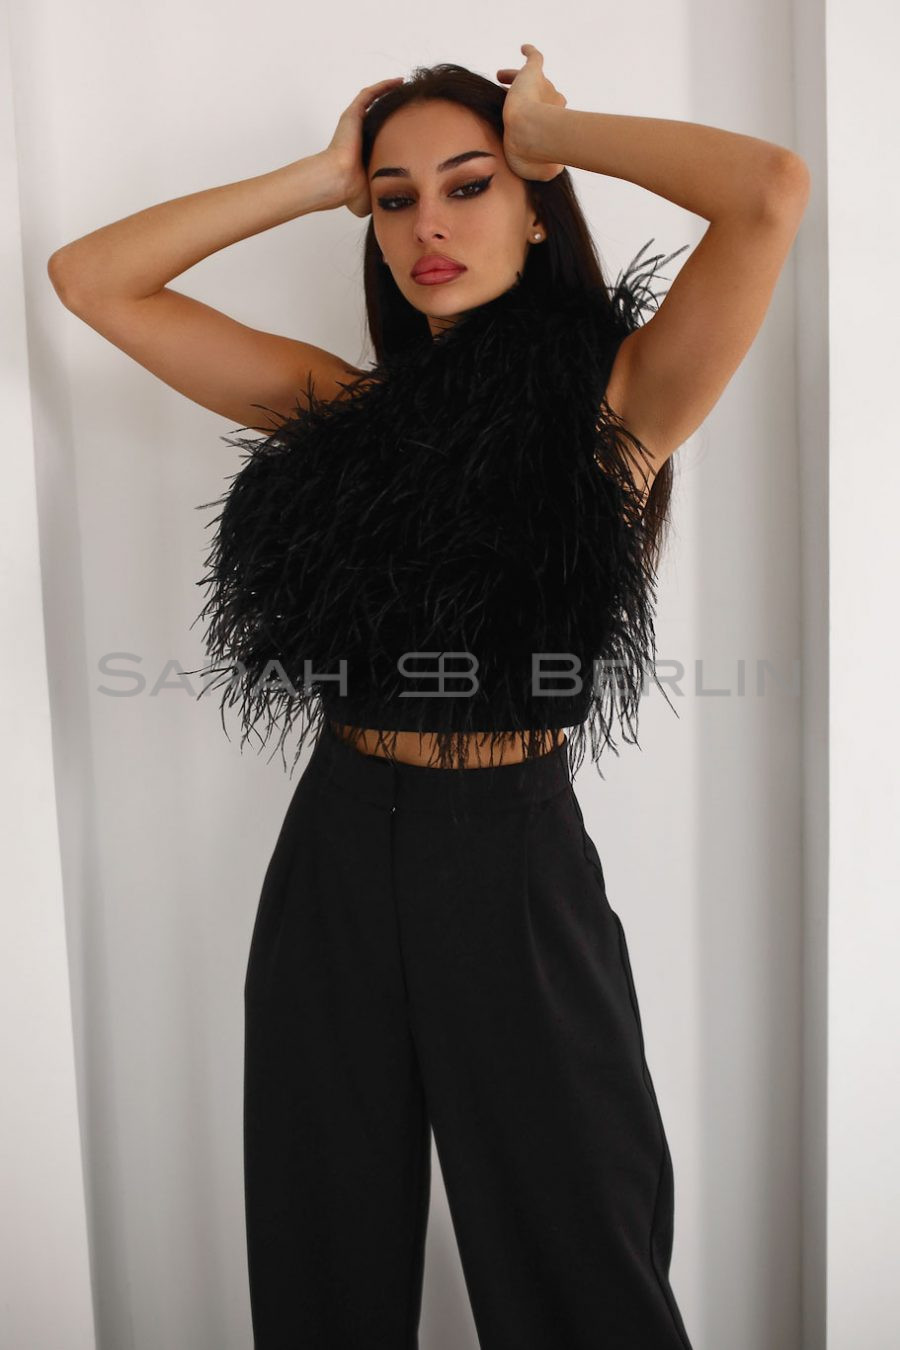 Suit with feathers one shoulder crop top with wide leg pants